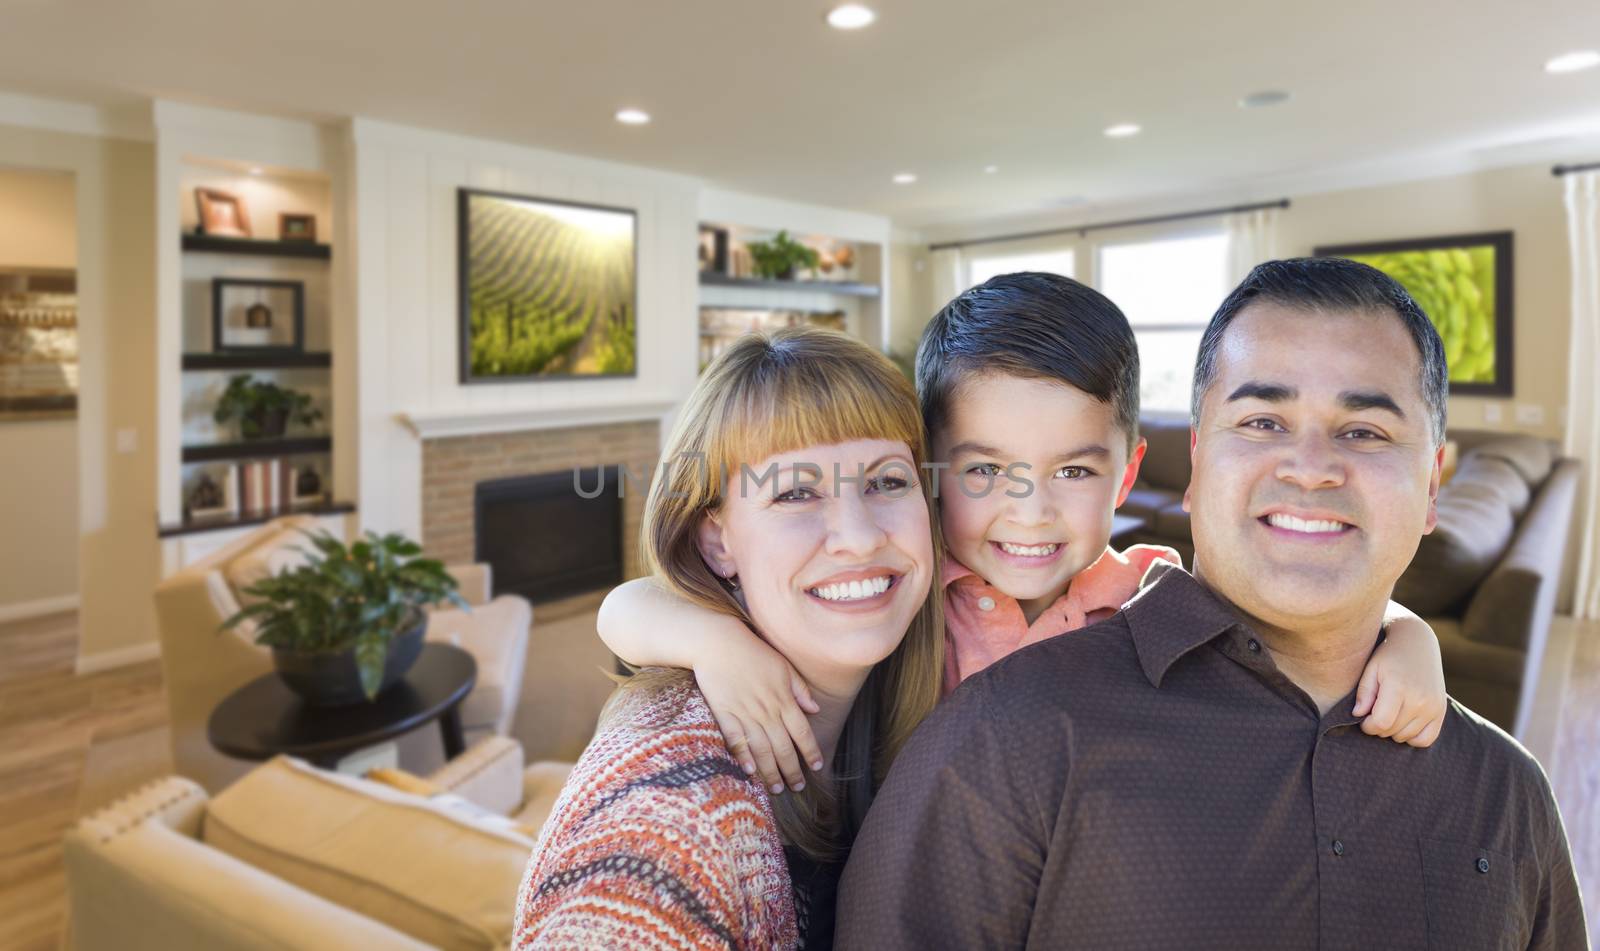 Happy Young Mixed Race Family Portrait In Living Room of Home.